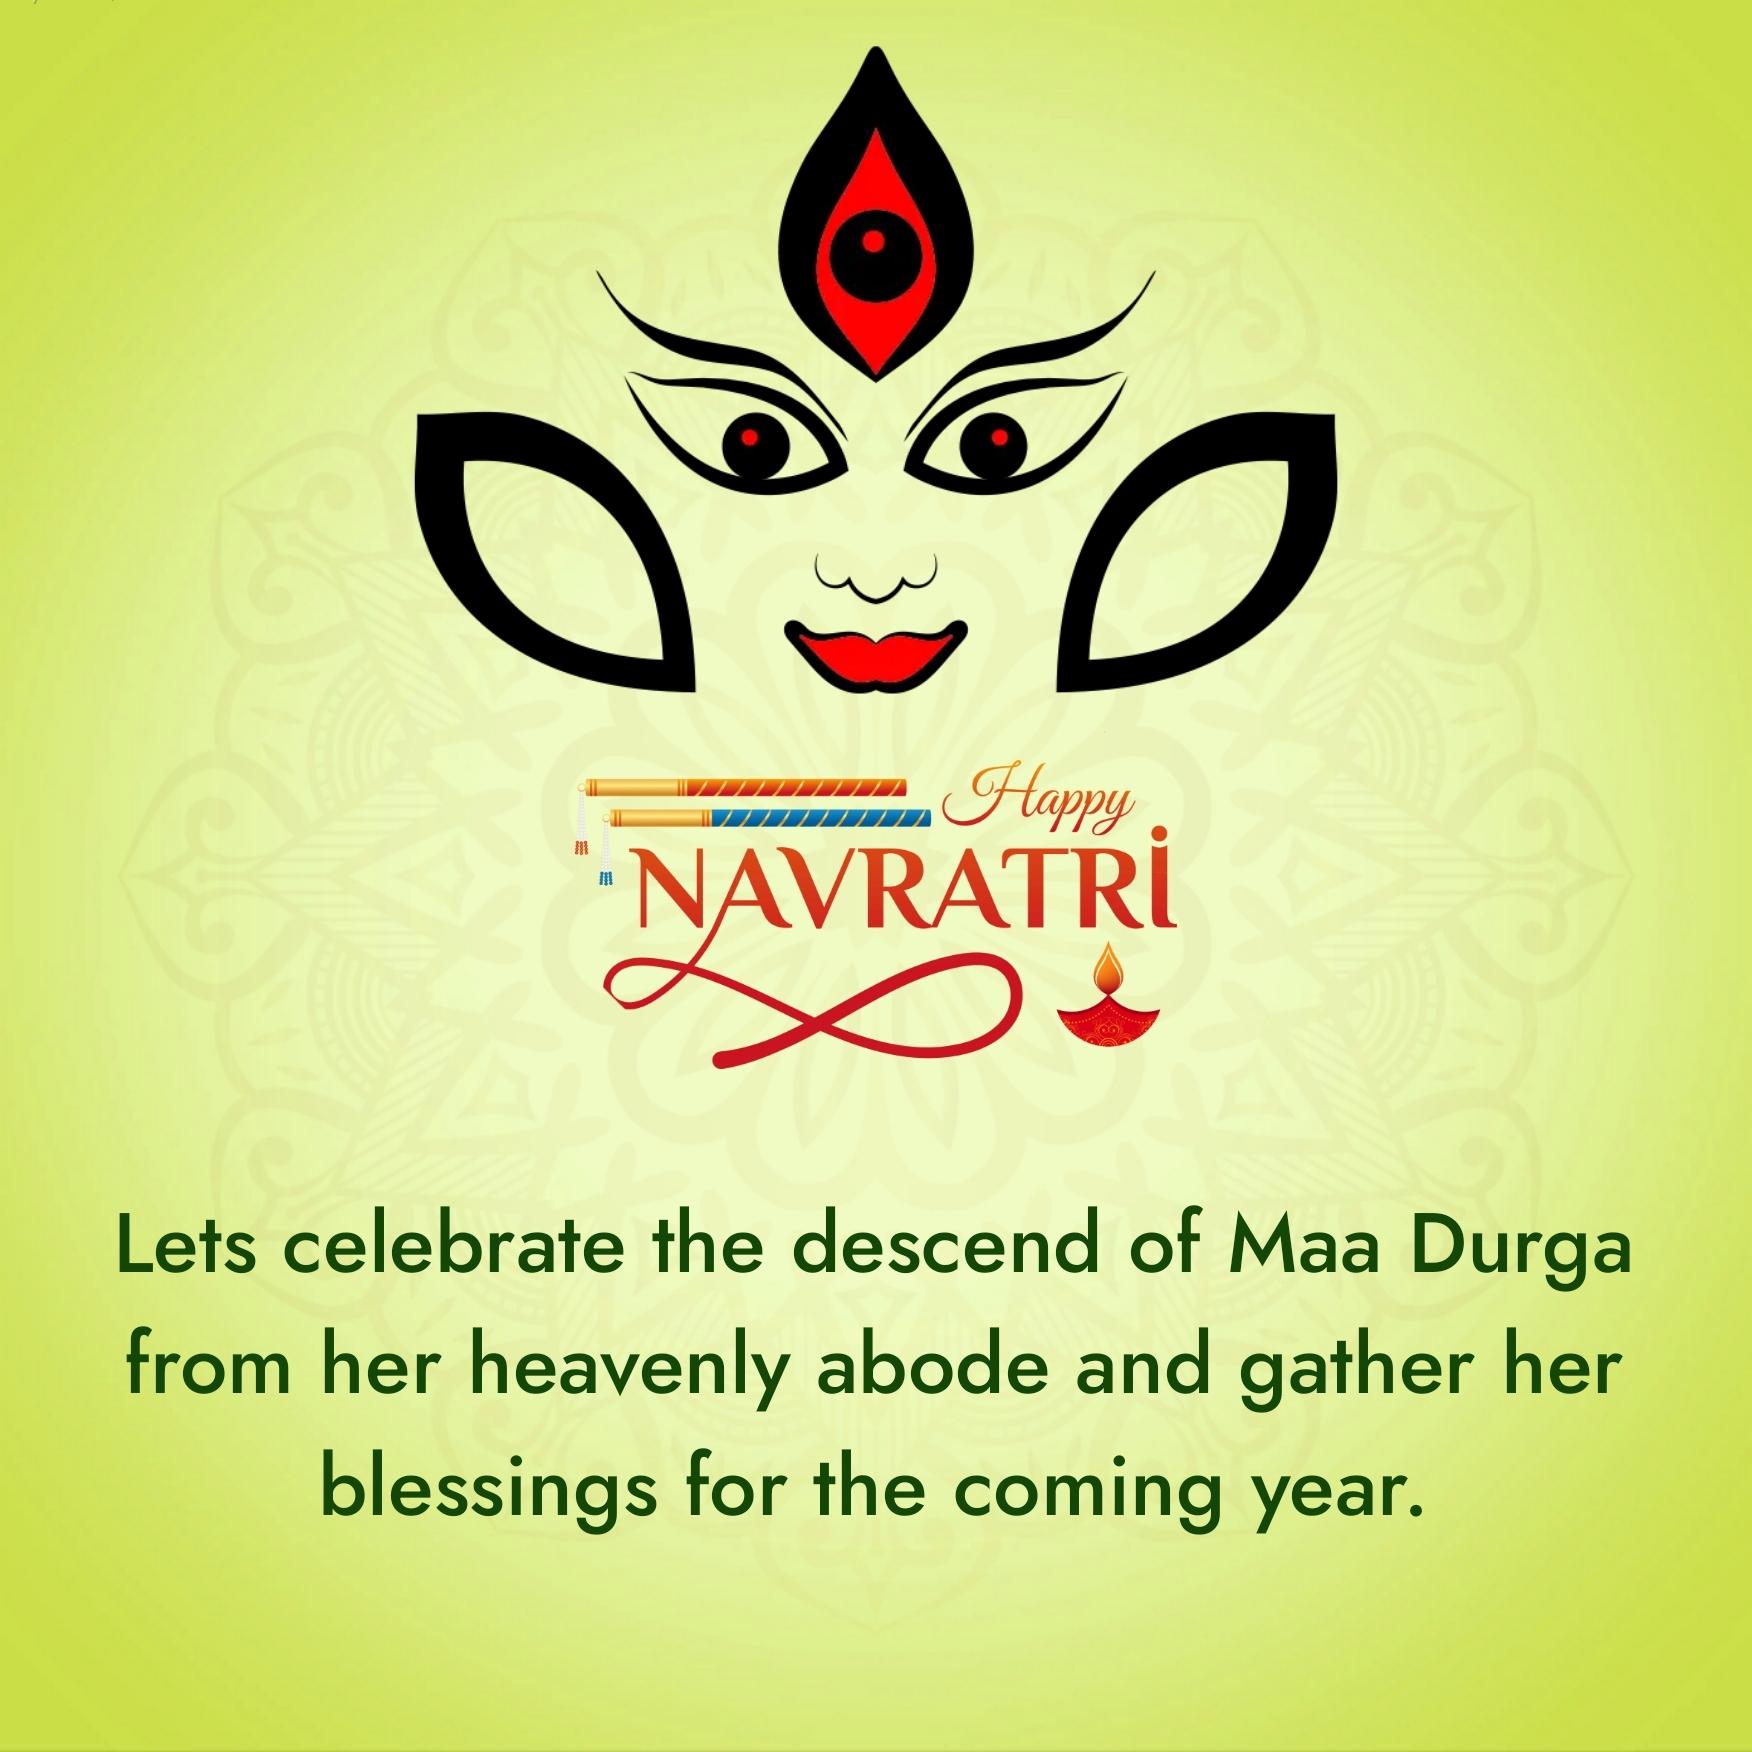 Lets celebrate the descend of Maa Durga from her heavenly abode